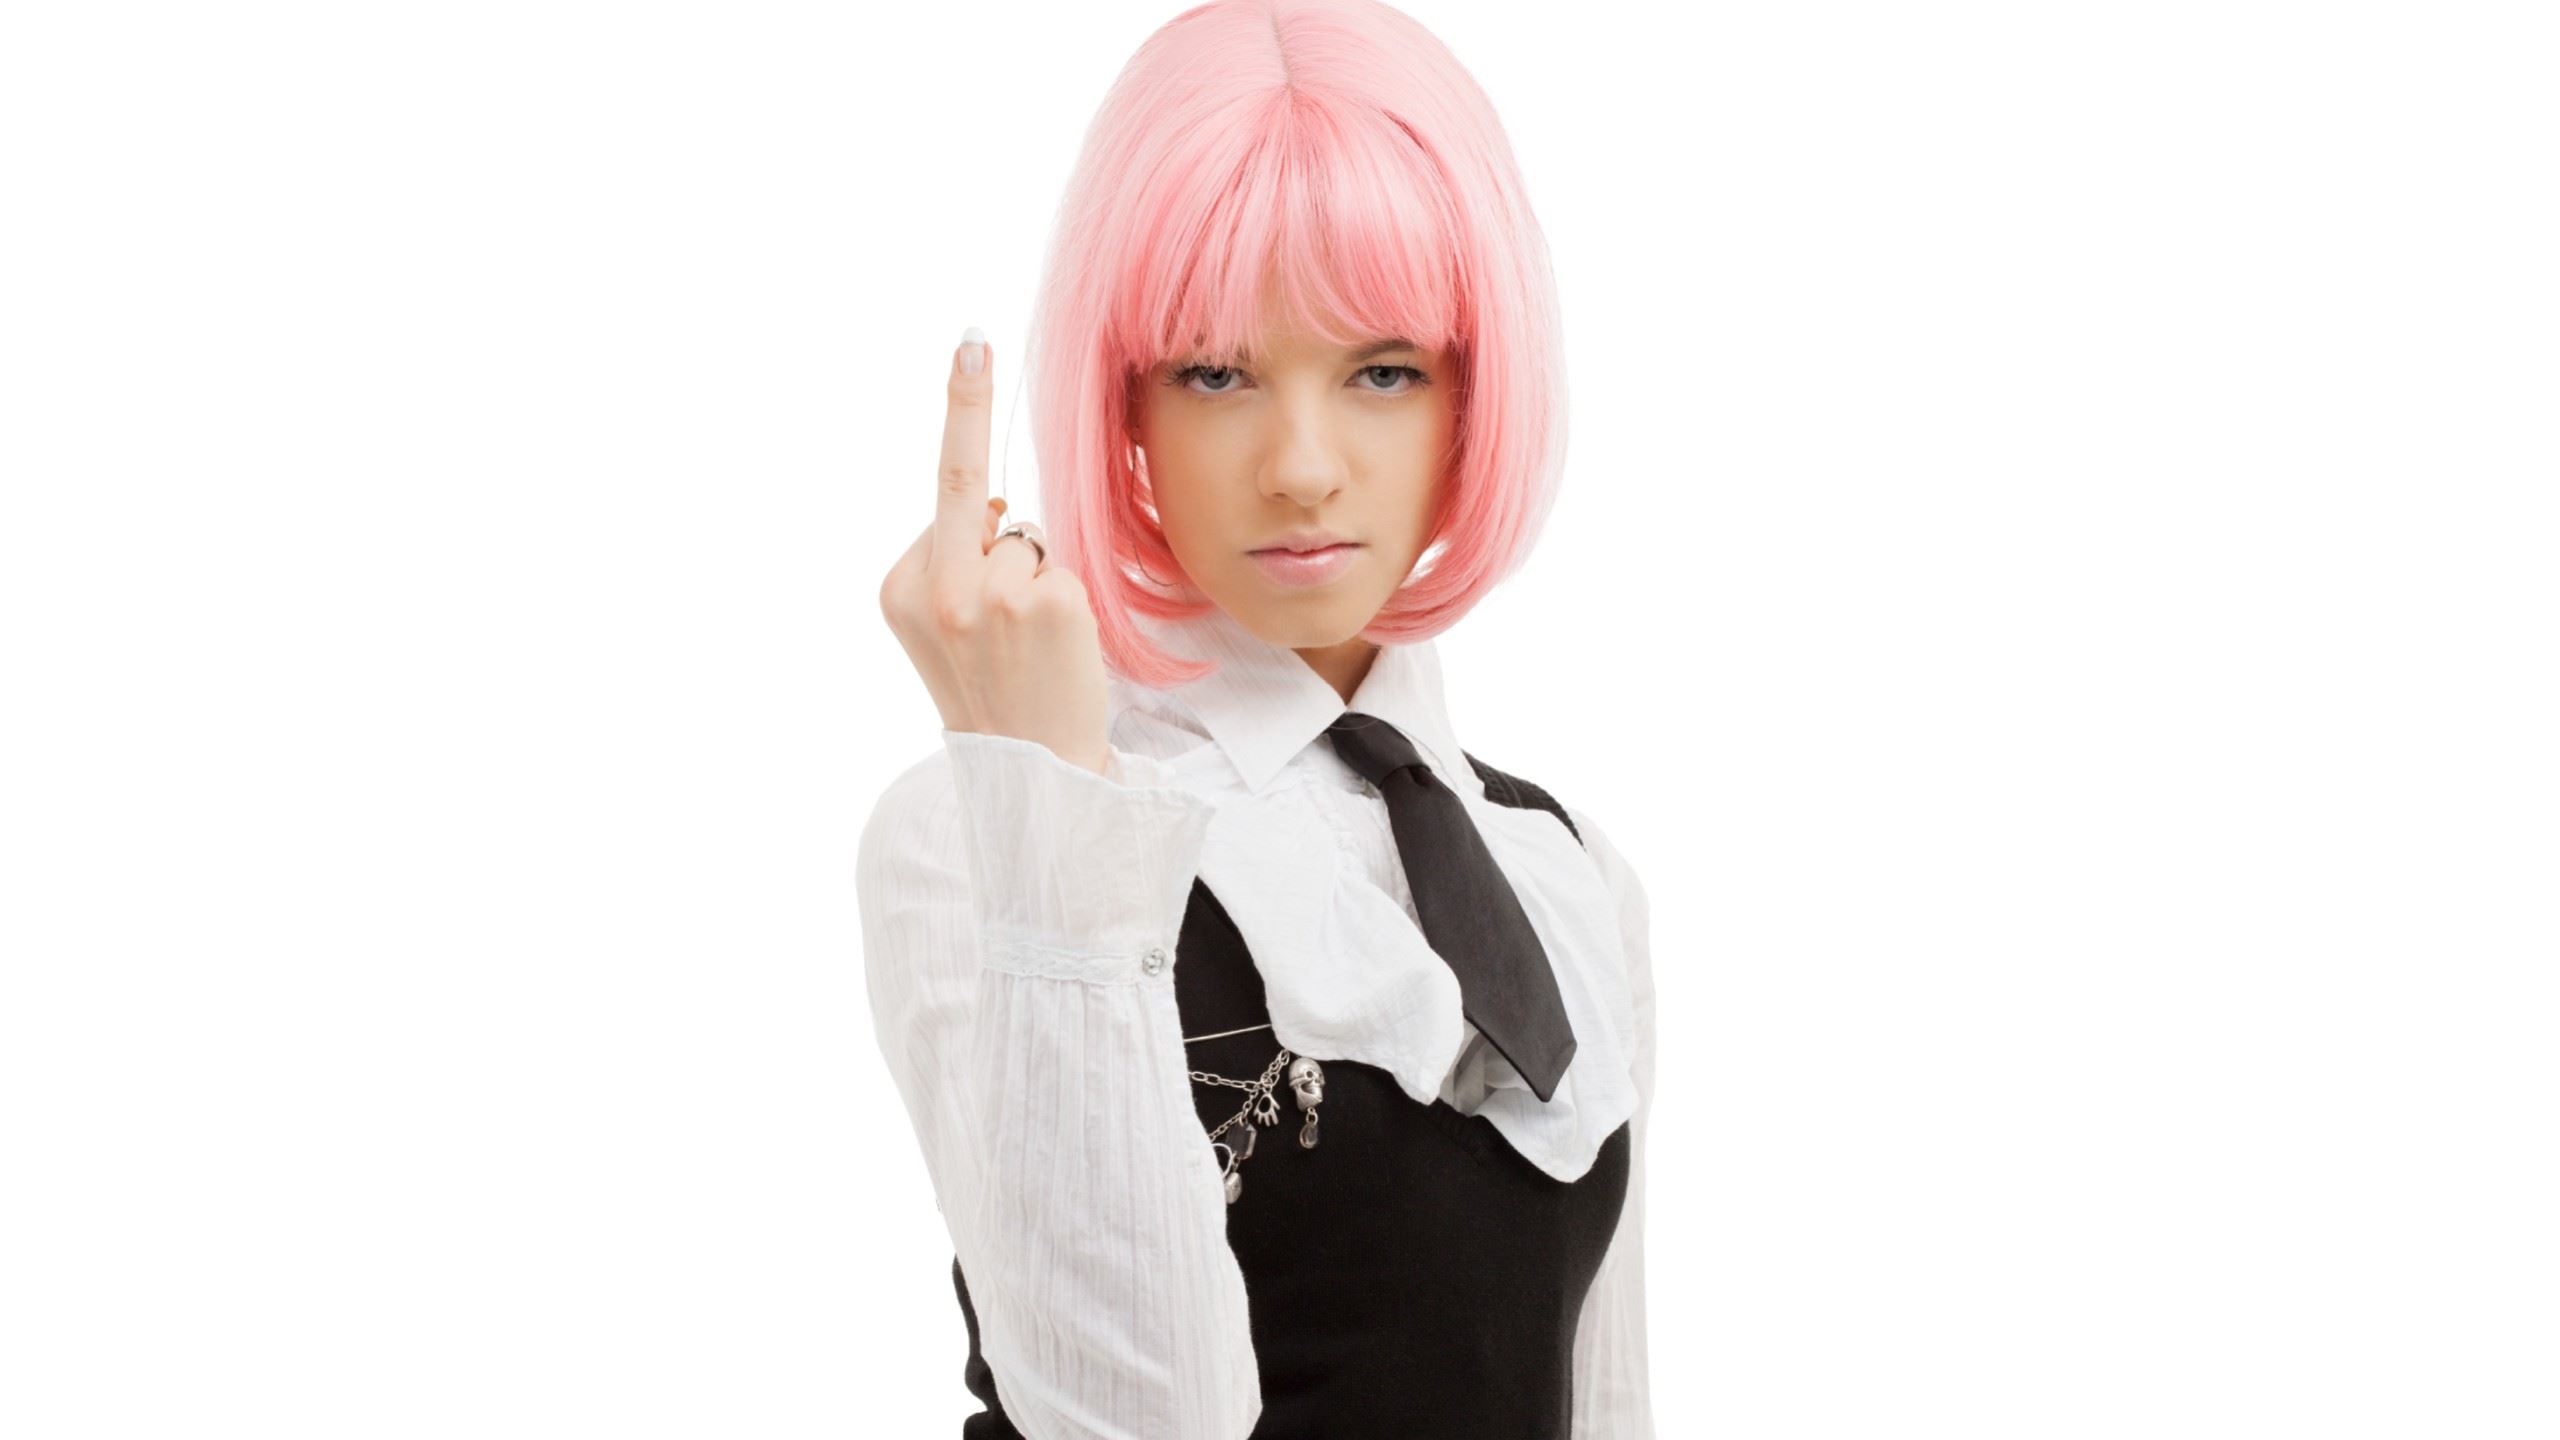 A woman with pink hair giving the finger.